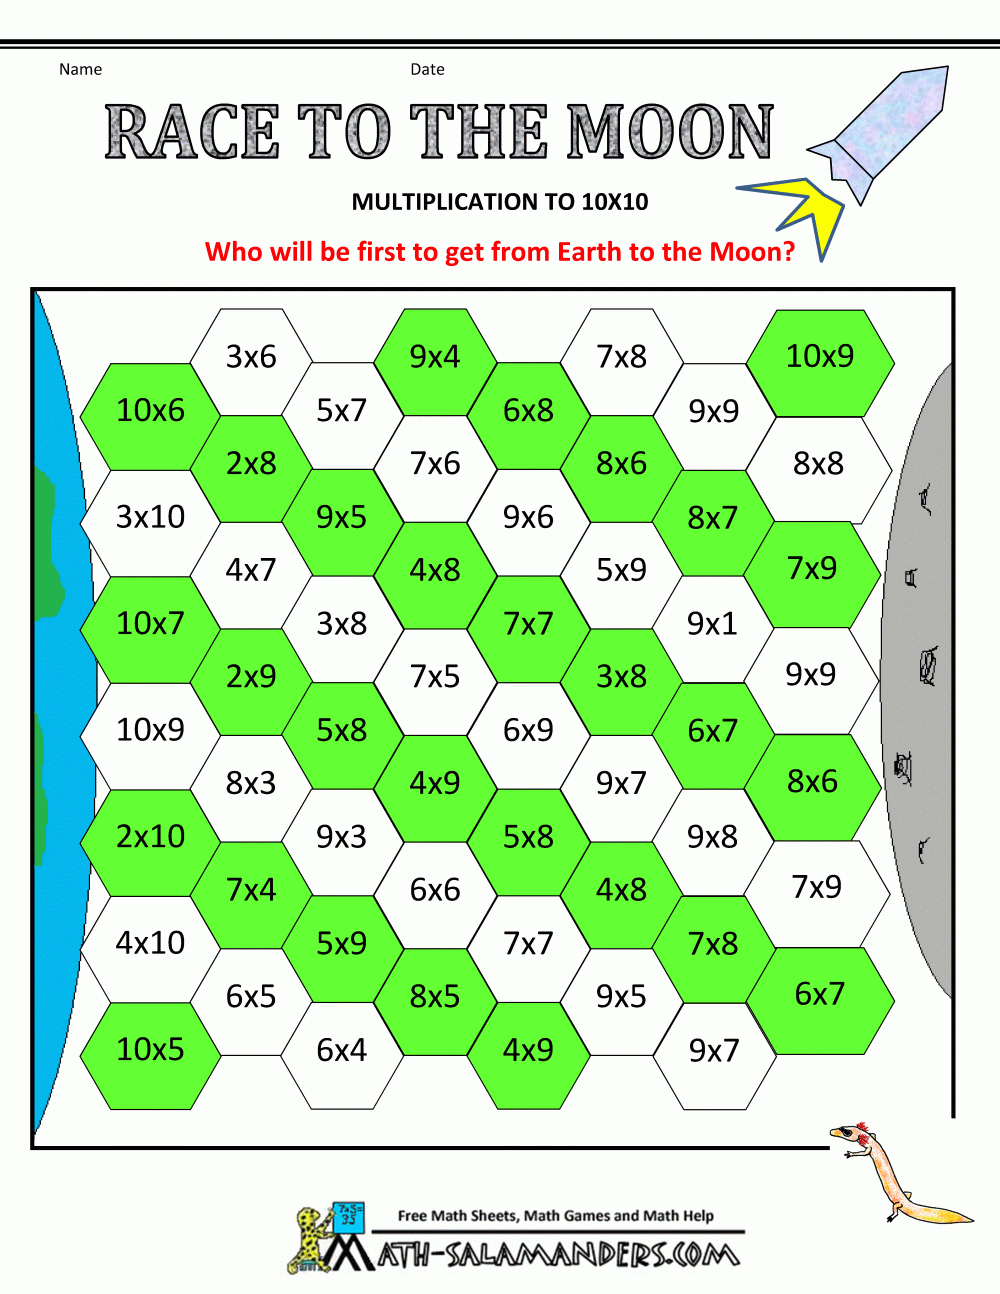 Multiplication Games Race To The Moon Multiplication To 10X10Plus - Free Printable Maths Games